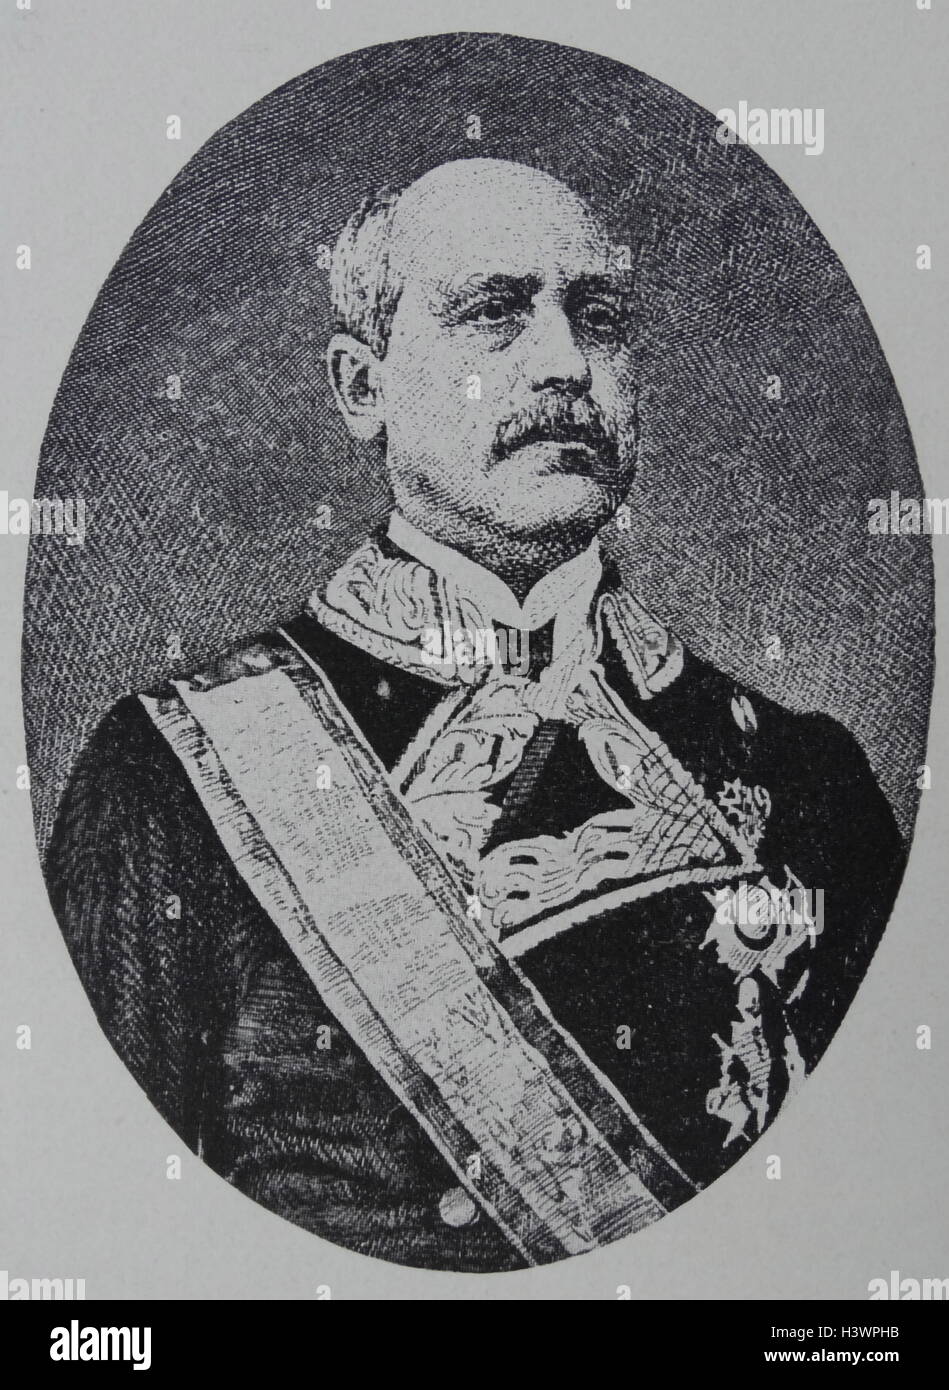 Francisco Serrano Domínguez Cuenca y Pérez de Vargas, 1st Duke of la Torre Grandee of Spain, Count of San Antonio (es: Francisco Serrano y Domínguez, primer duque de la Torre, conde de San Antonio; 17 December 1810 – 25 November 1885) was a Spanish marshal and statesman. He was Prime Minister of Spain and regent in 1868-1869. Stock Photo